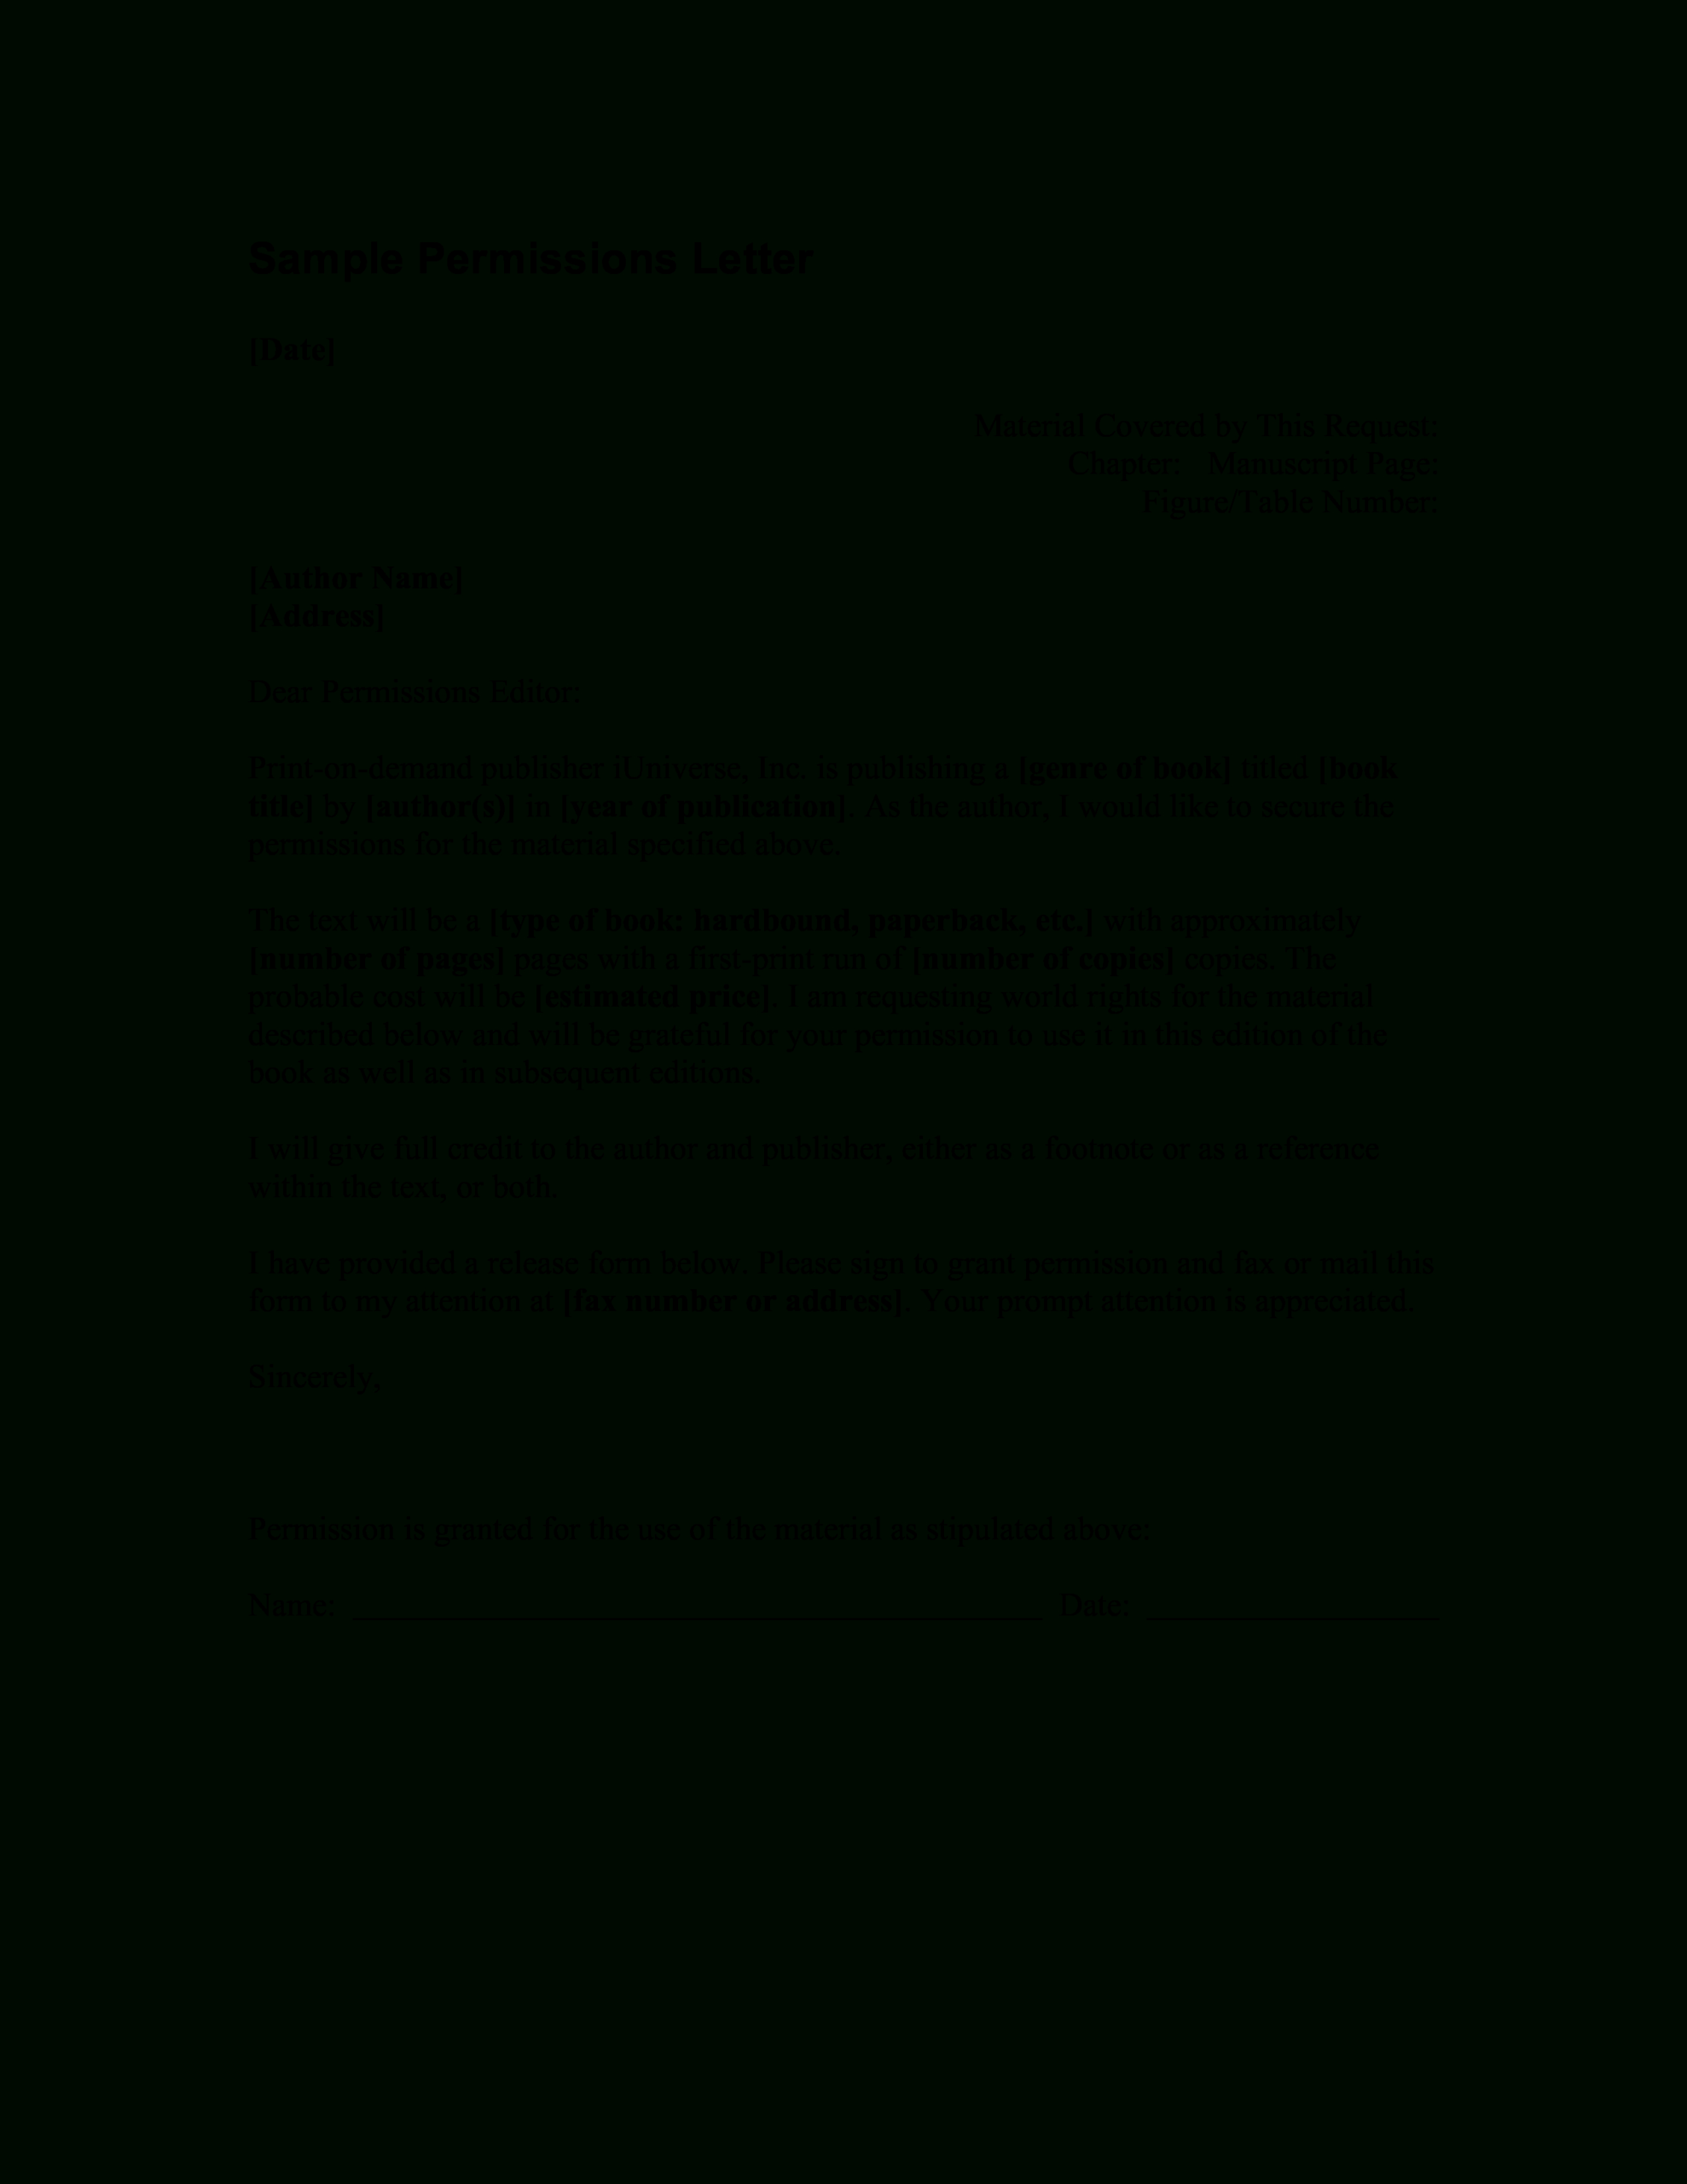 Formal Asking Permission Letter | Templates At Intended For Material Letters Template